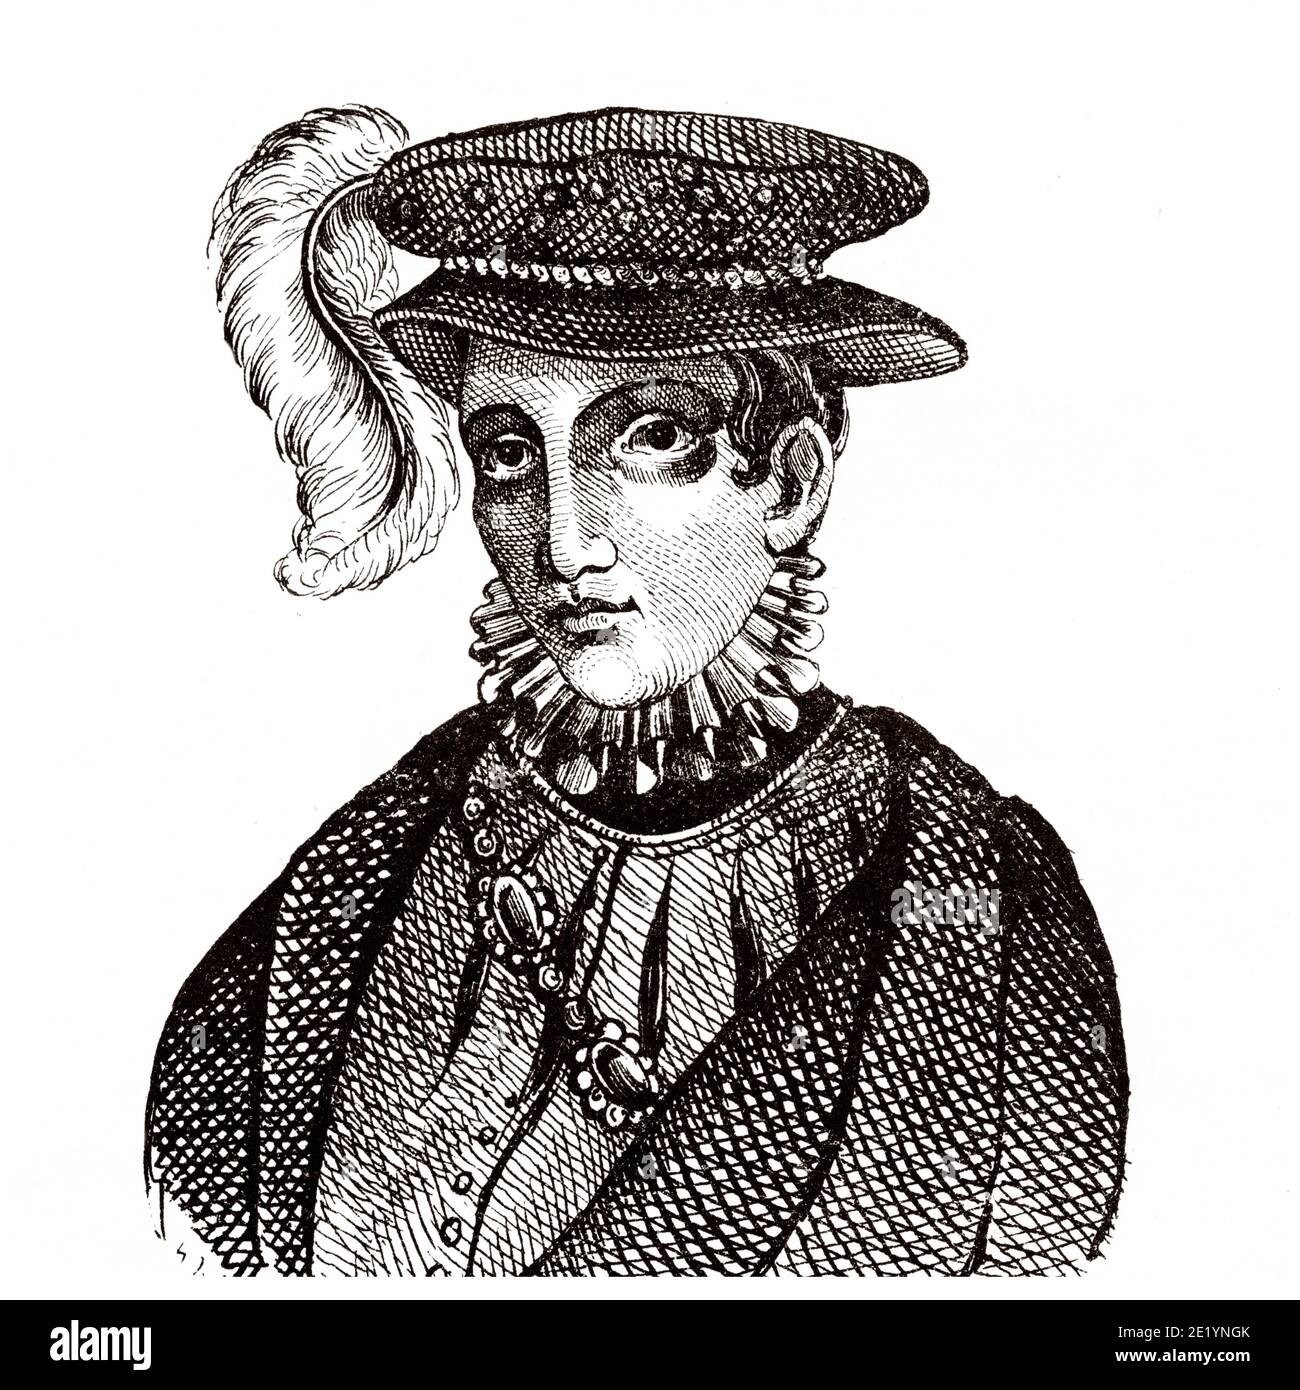 Portrait of François II (1544 - 1560). King of France from 1559 to 1560. Valois–Angoulême Branch. History of France, from the book Atlas de la France 1842 Stock Photo